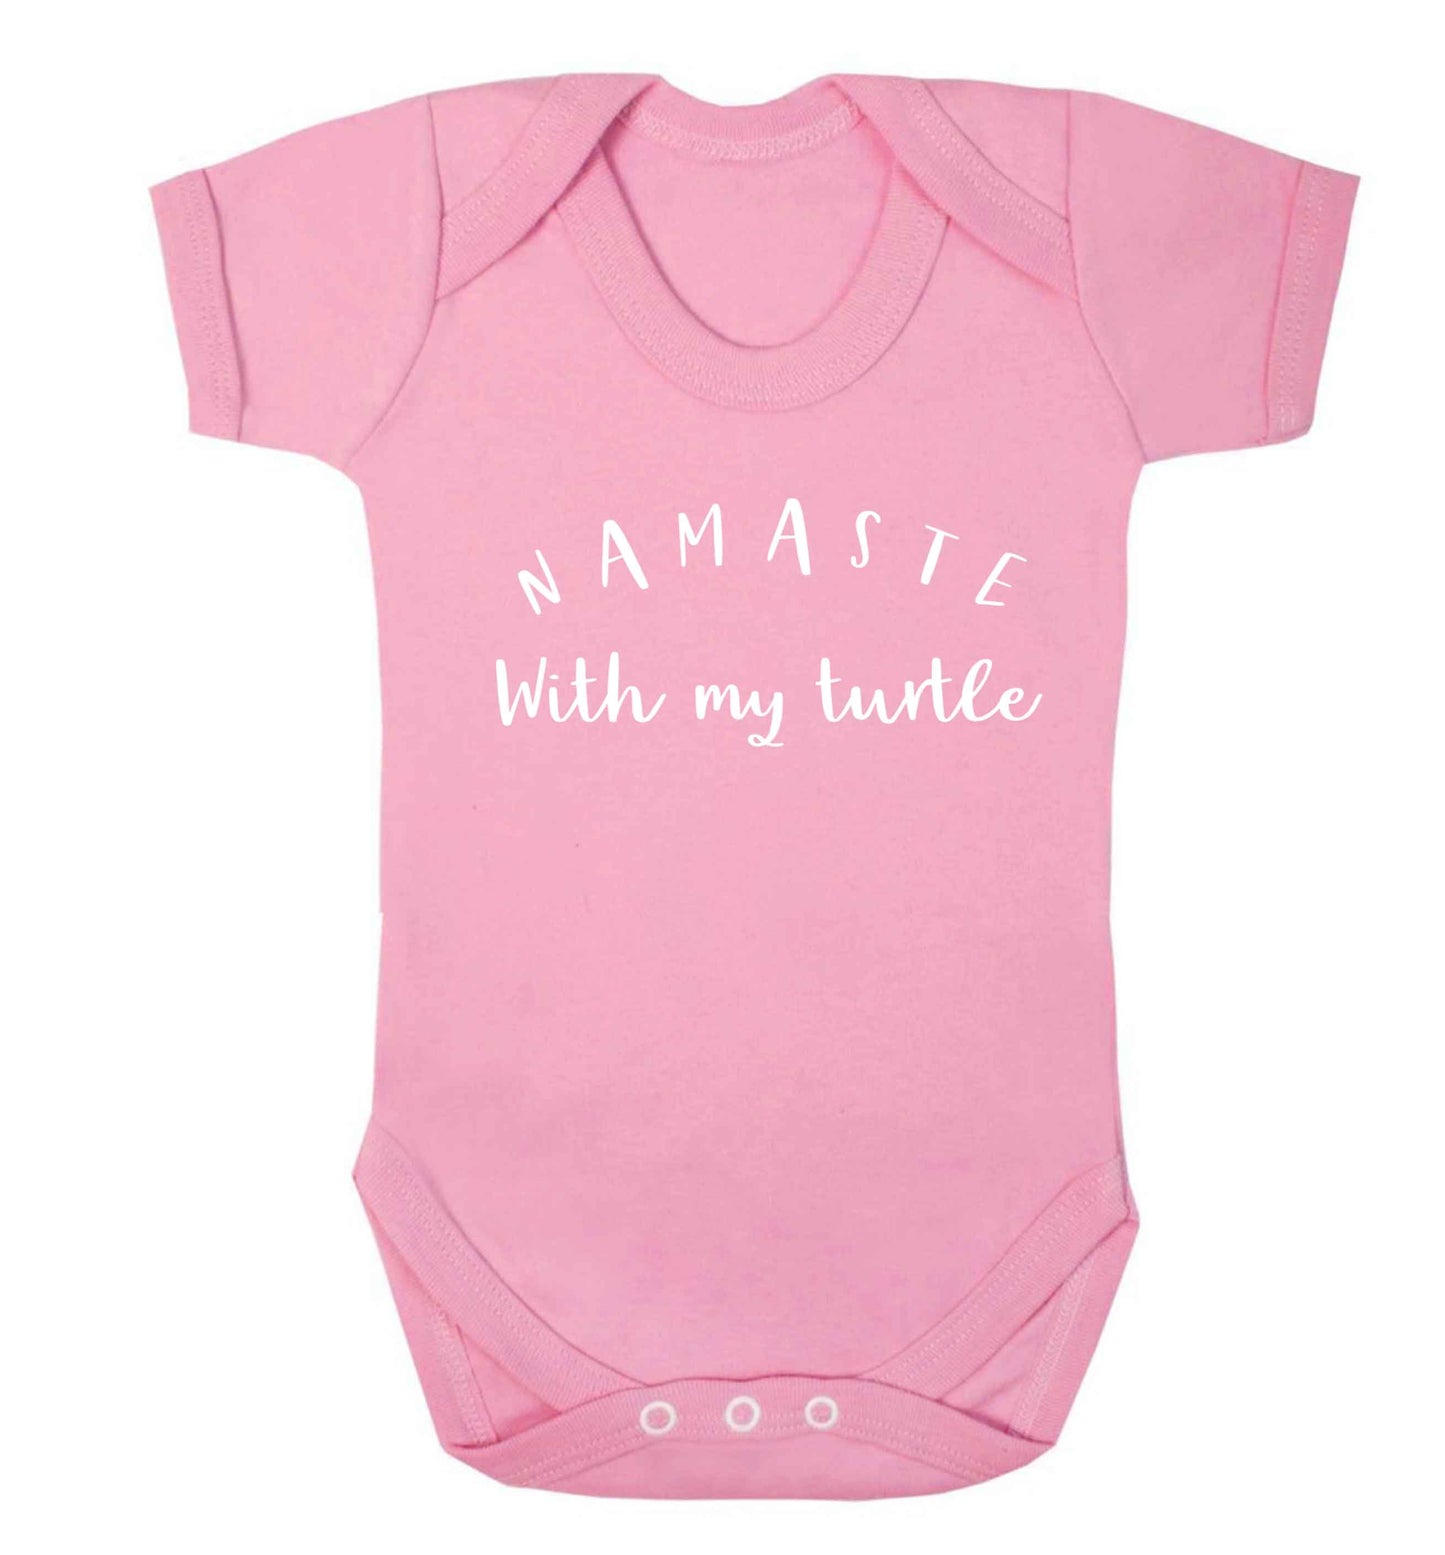 Namaste with my turtle Baby Vest pale pink 18-24 months